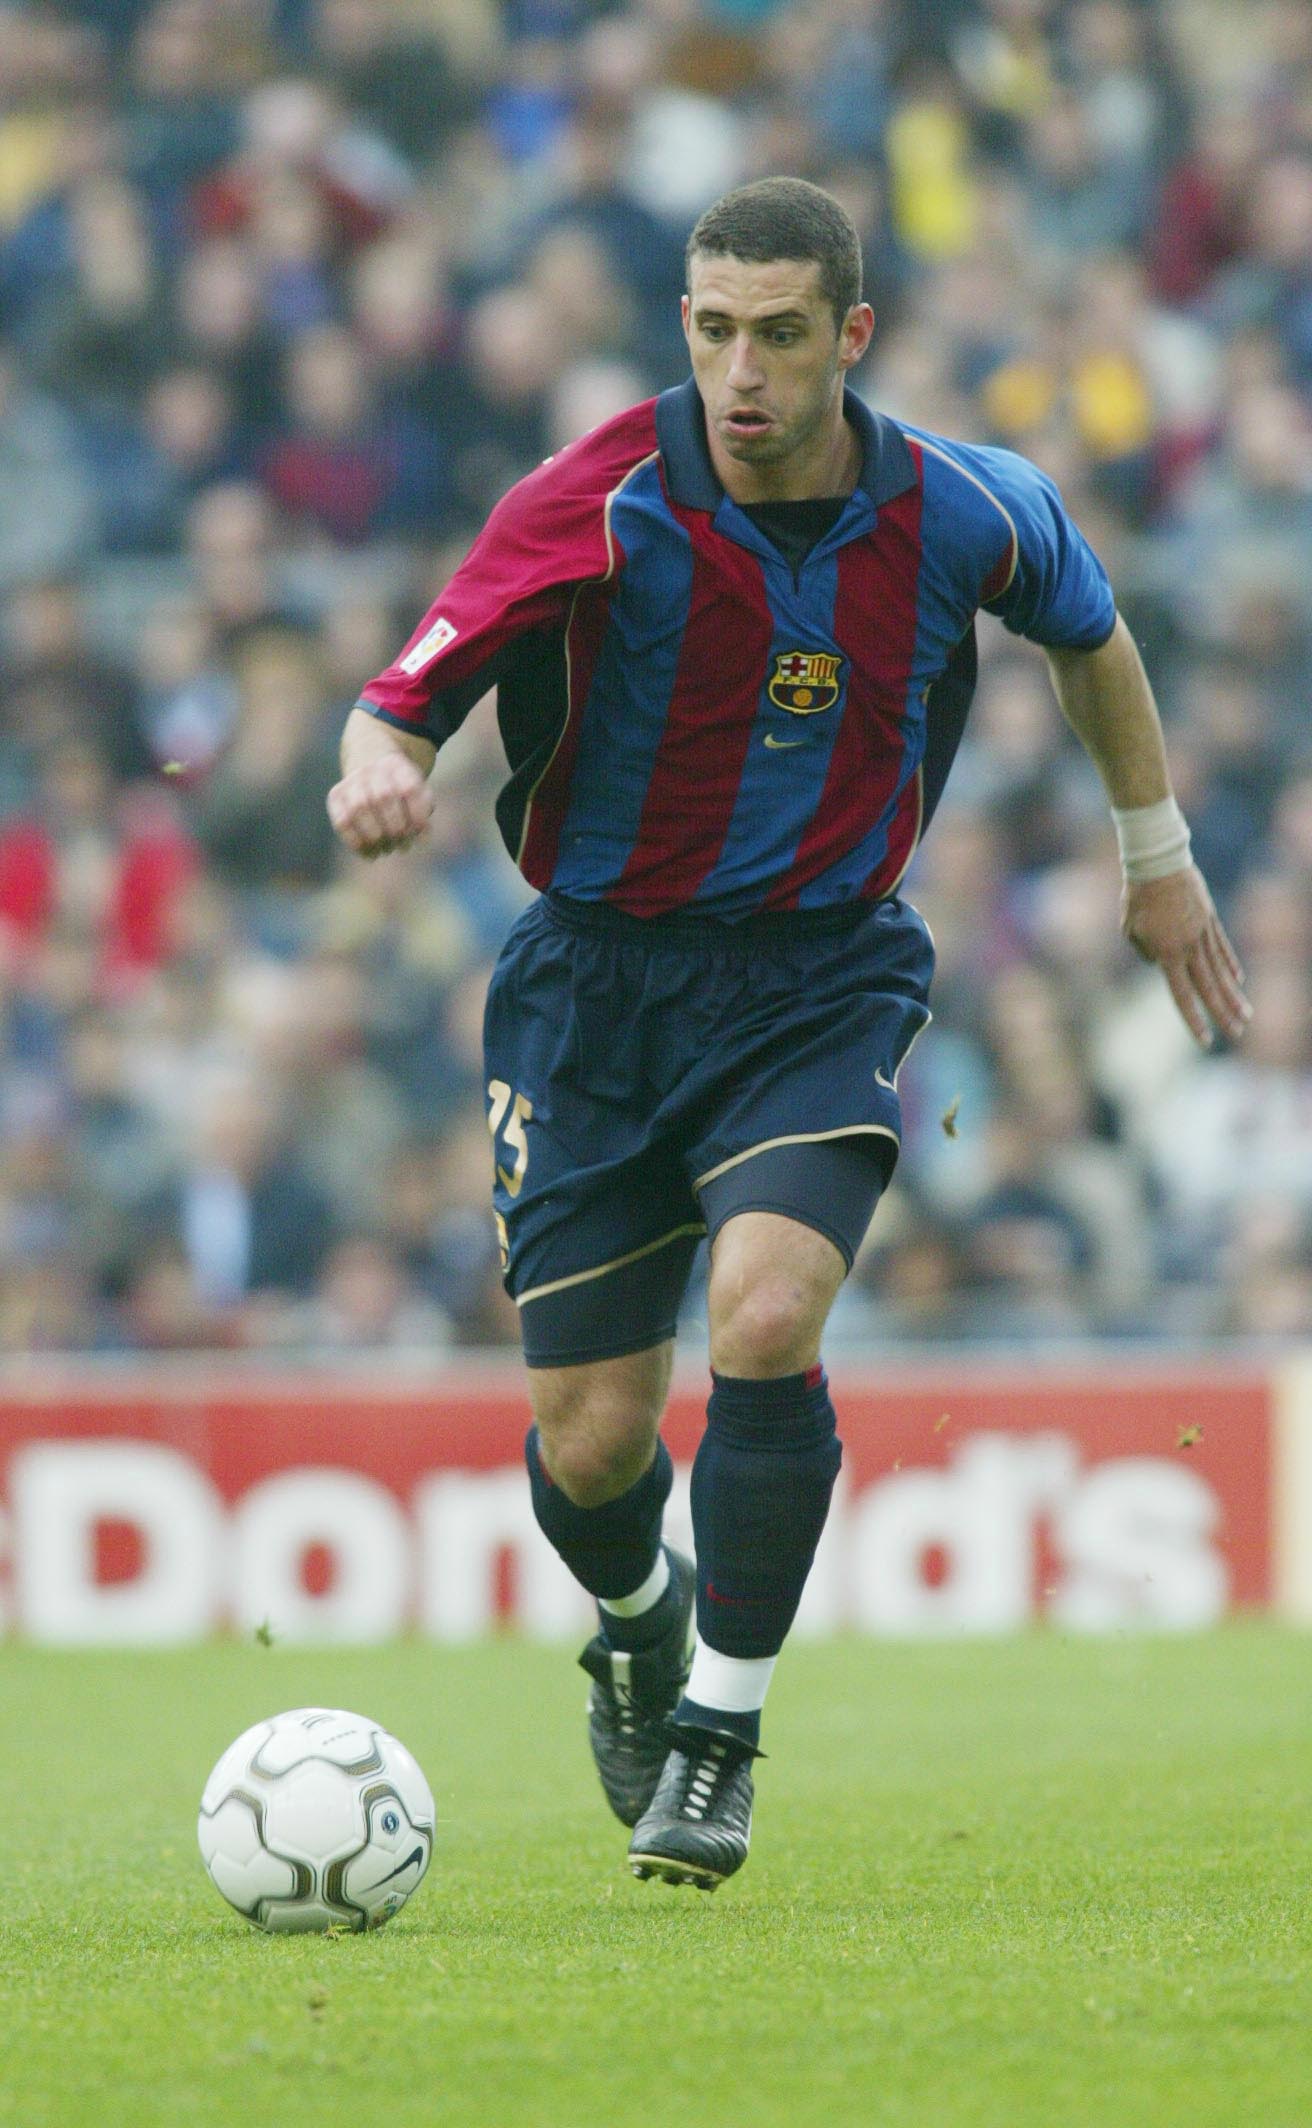 14 Apr 2002:  Fabio Rochemback of Barcelona in action during the Primera Liga match between Barcelona and Alaves, played at the Camp Nou Stadium, Barcelona.  DIGITAL IMAGE. Mandatory Credit: Firo Foto/Getty Images